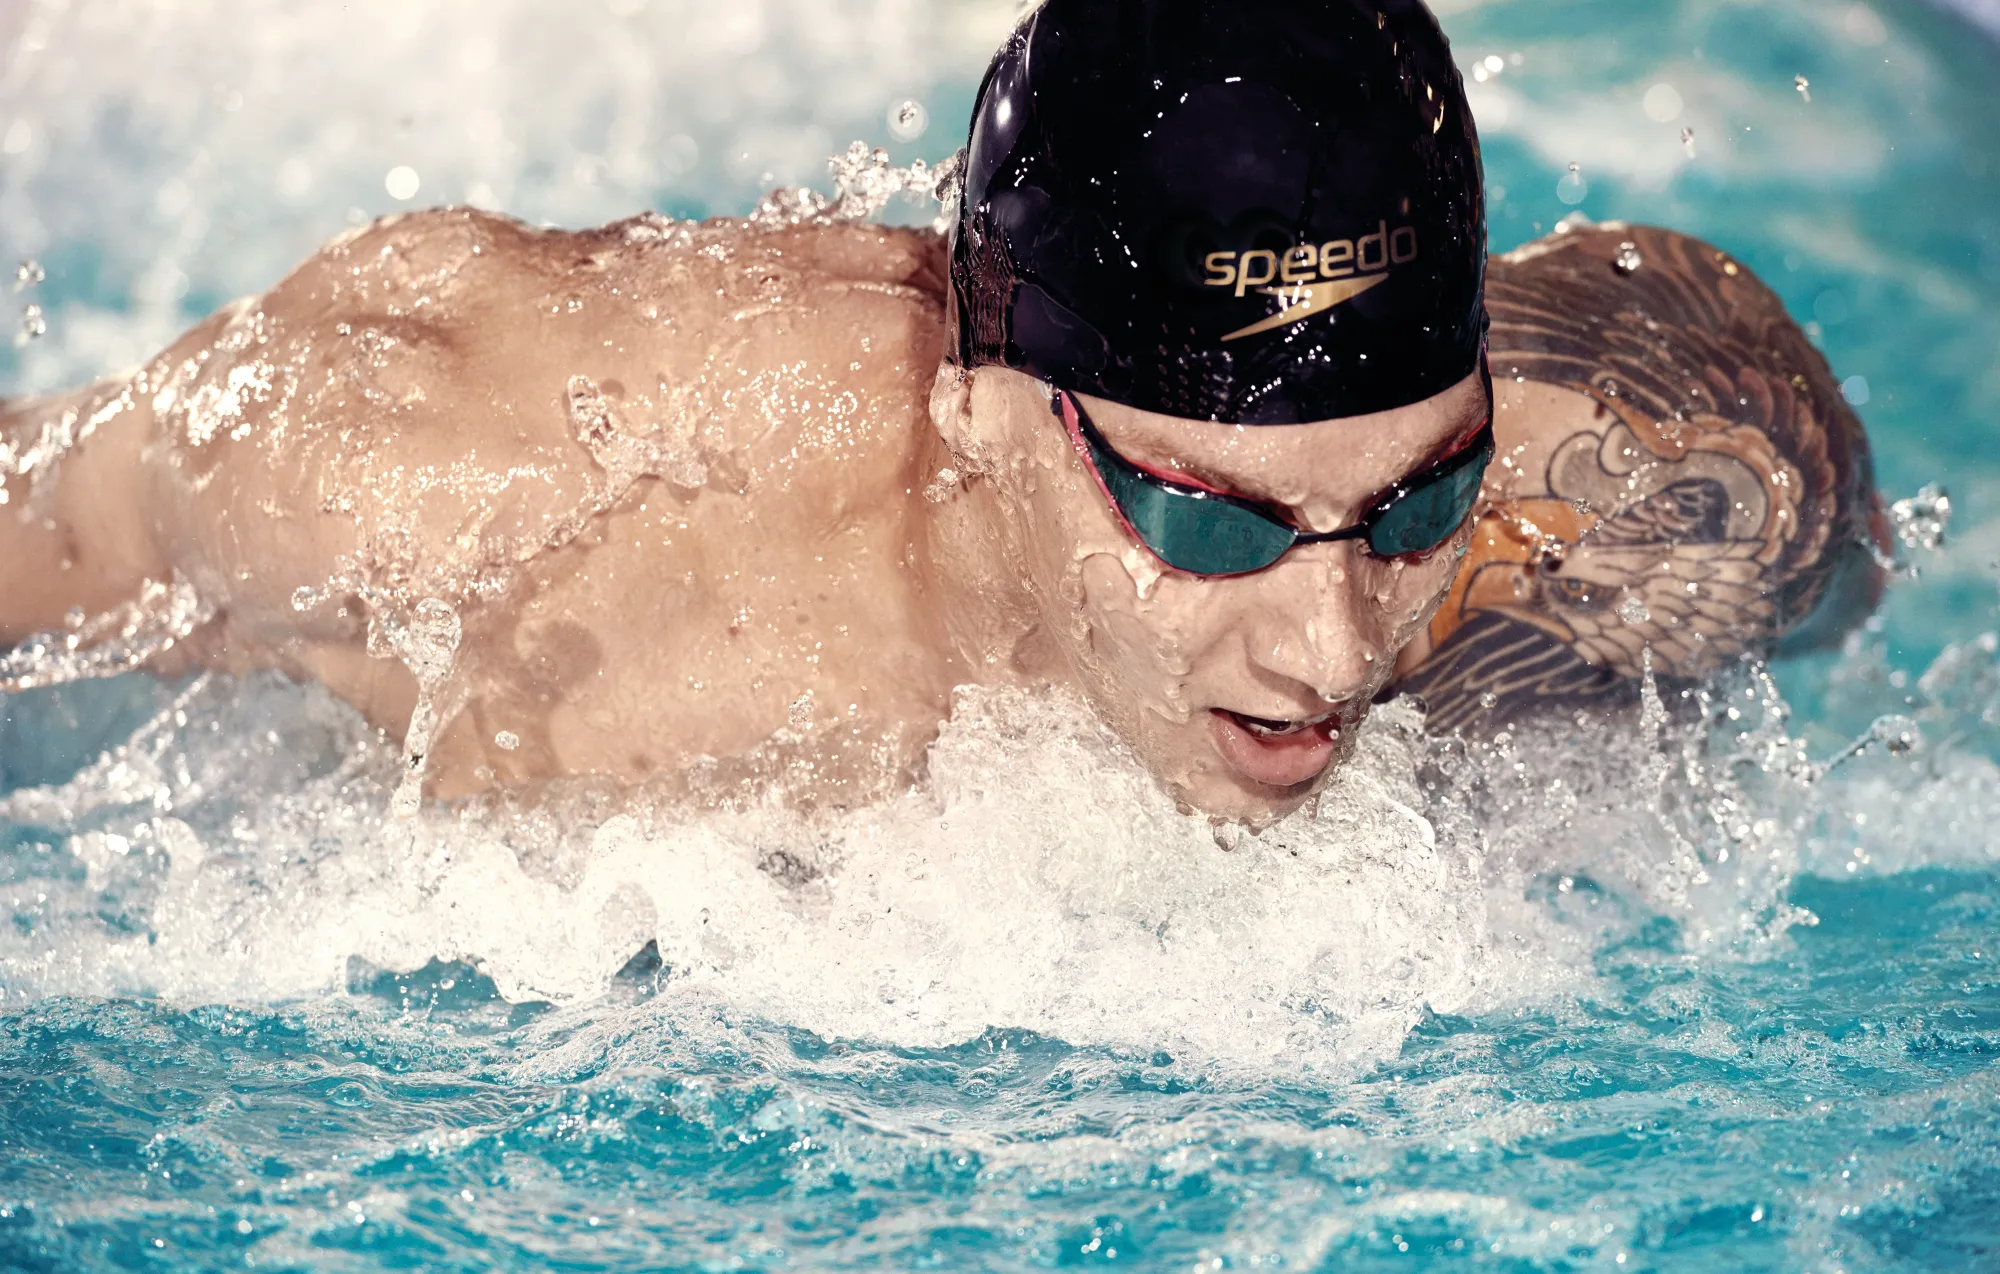 Design and Development of Swimming Racing Goggles